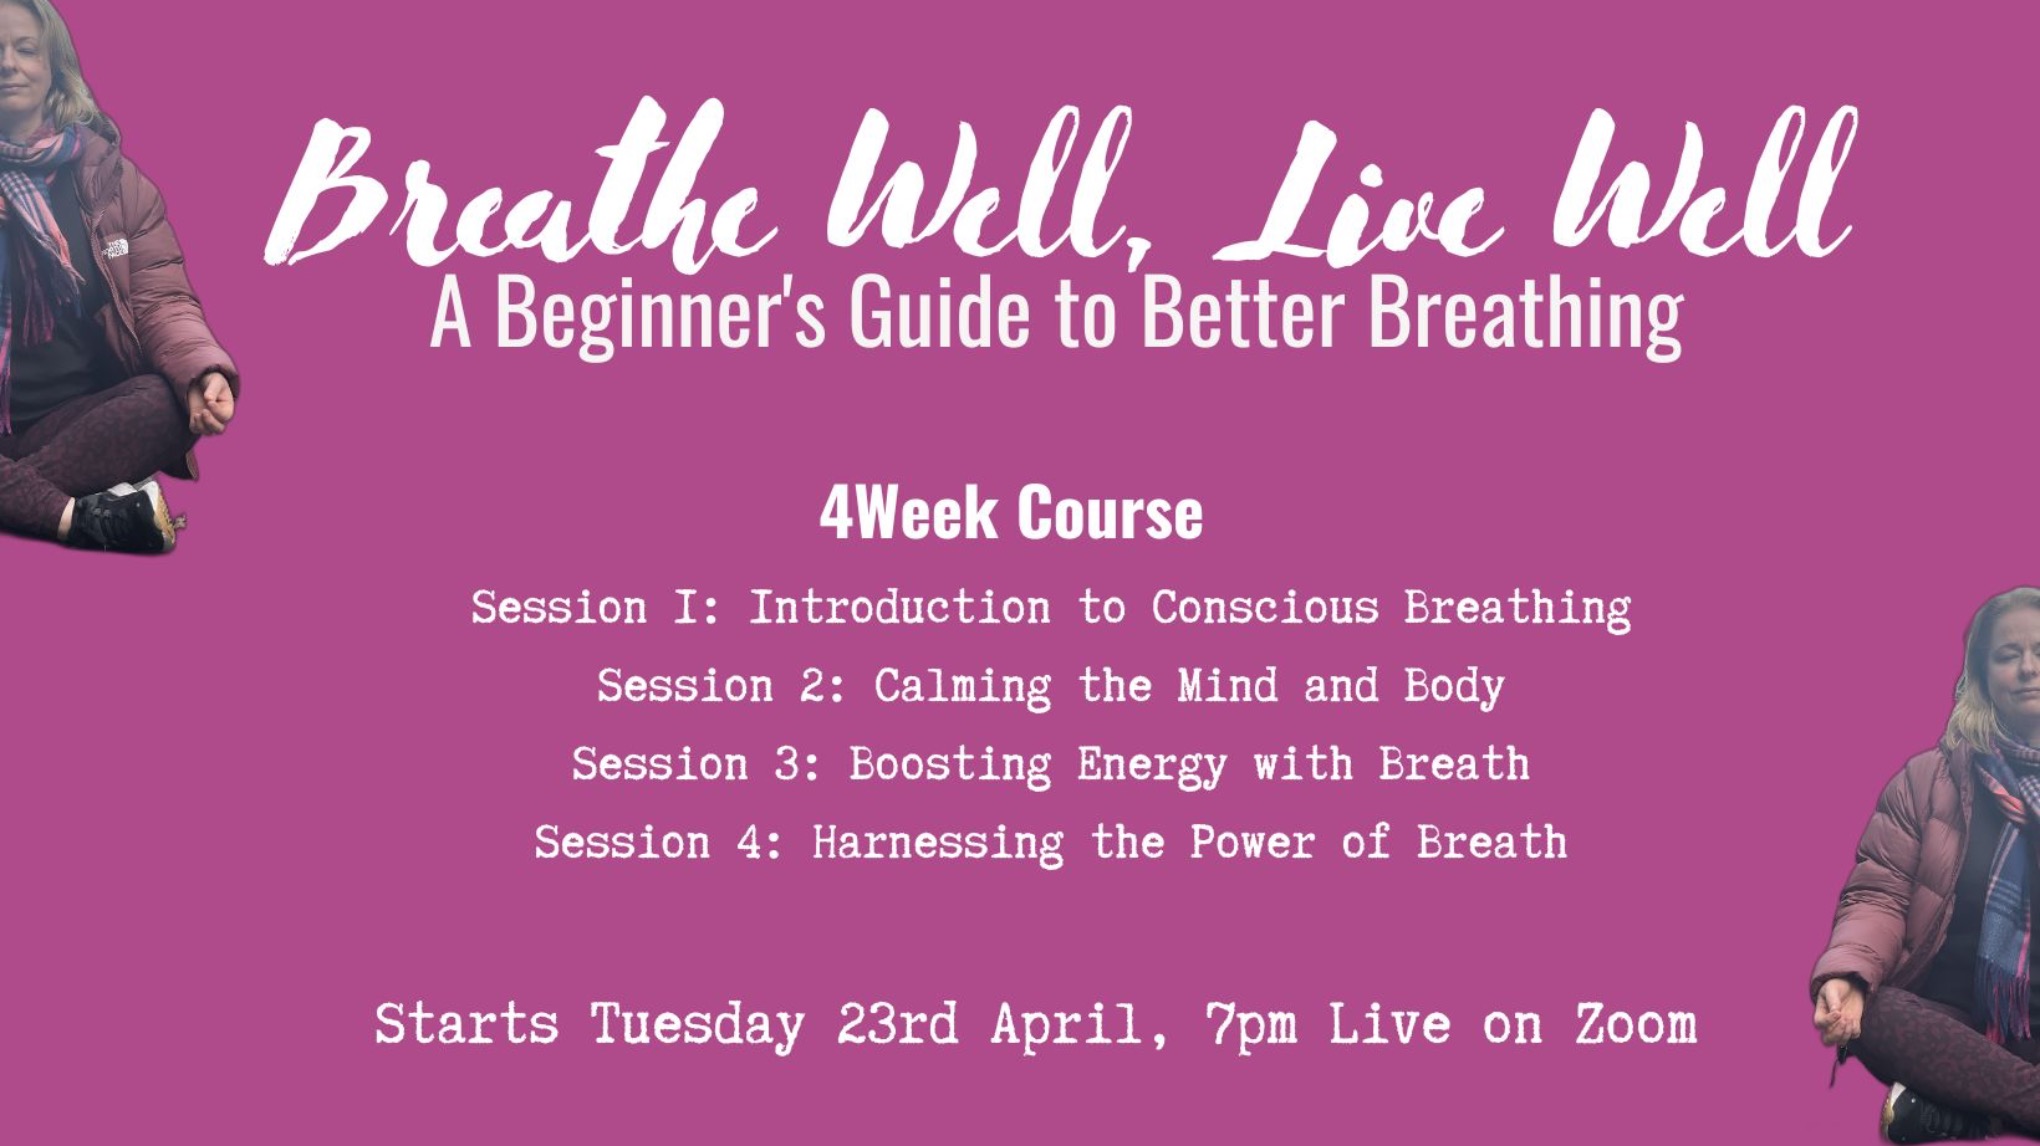 Breathe Well, Live Well: A Beginner's Guide to Better Breathing